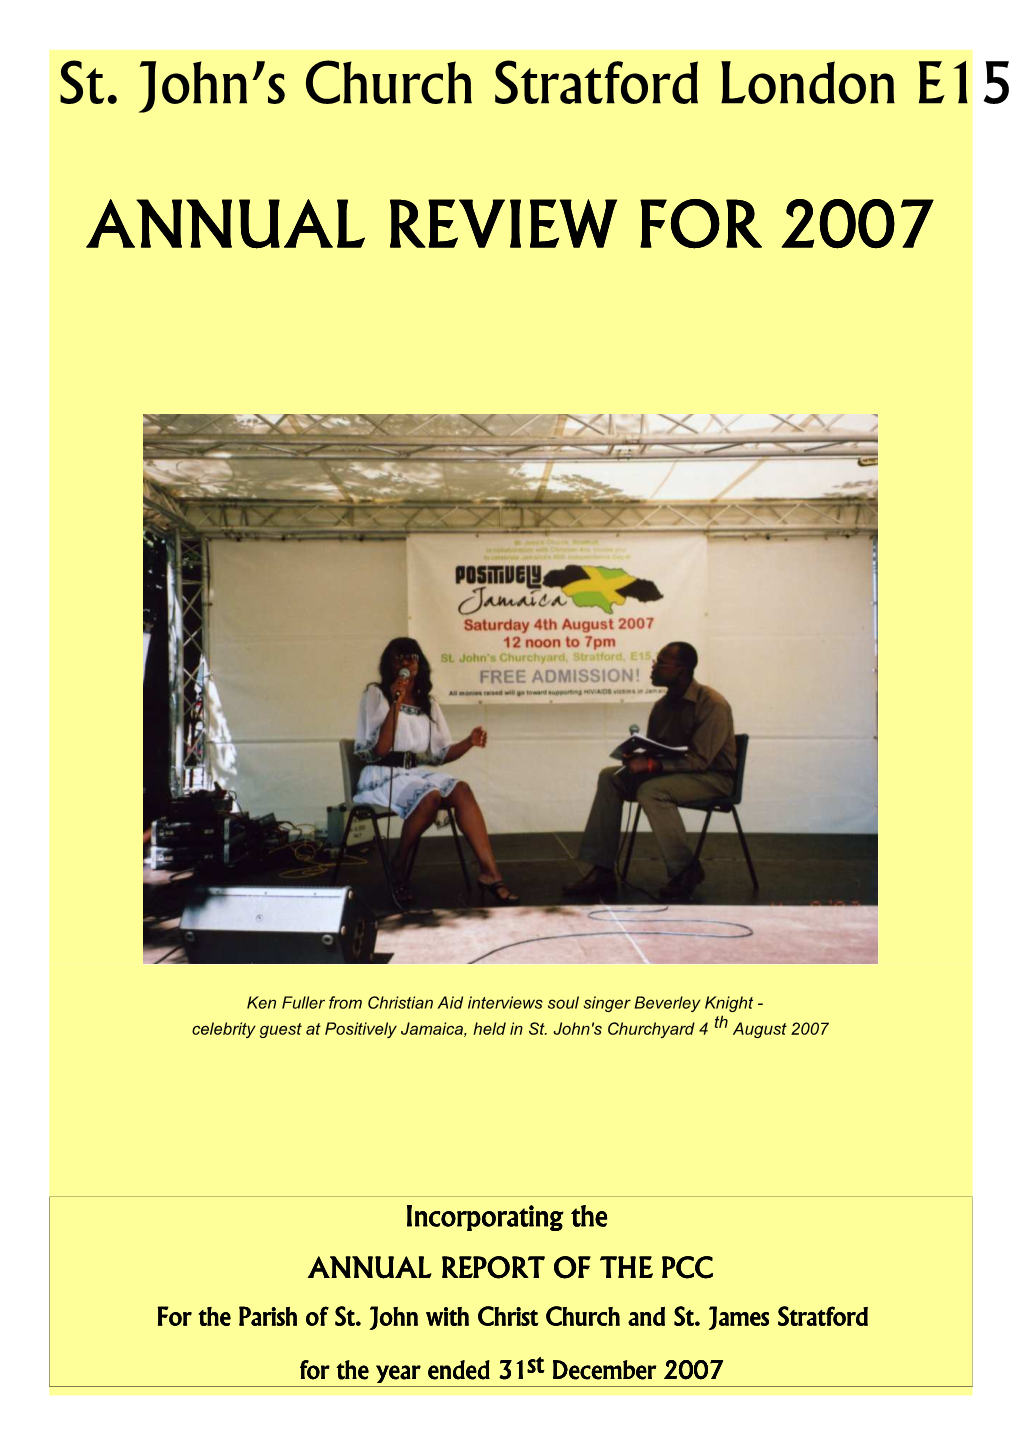 Annual Review for 2007